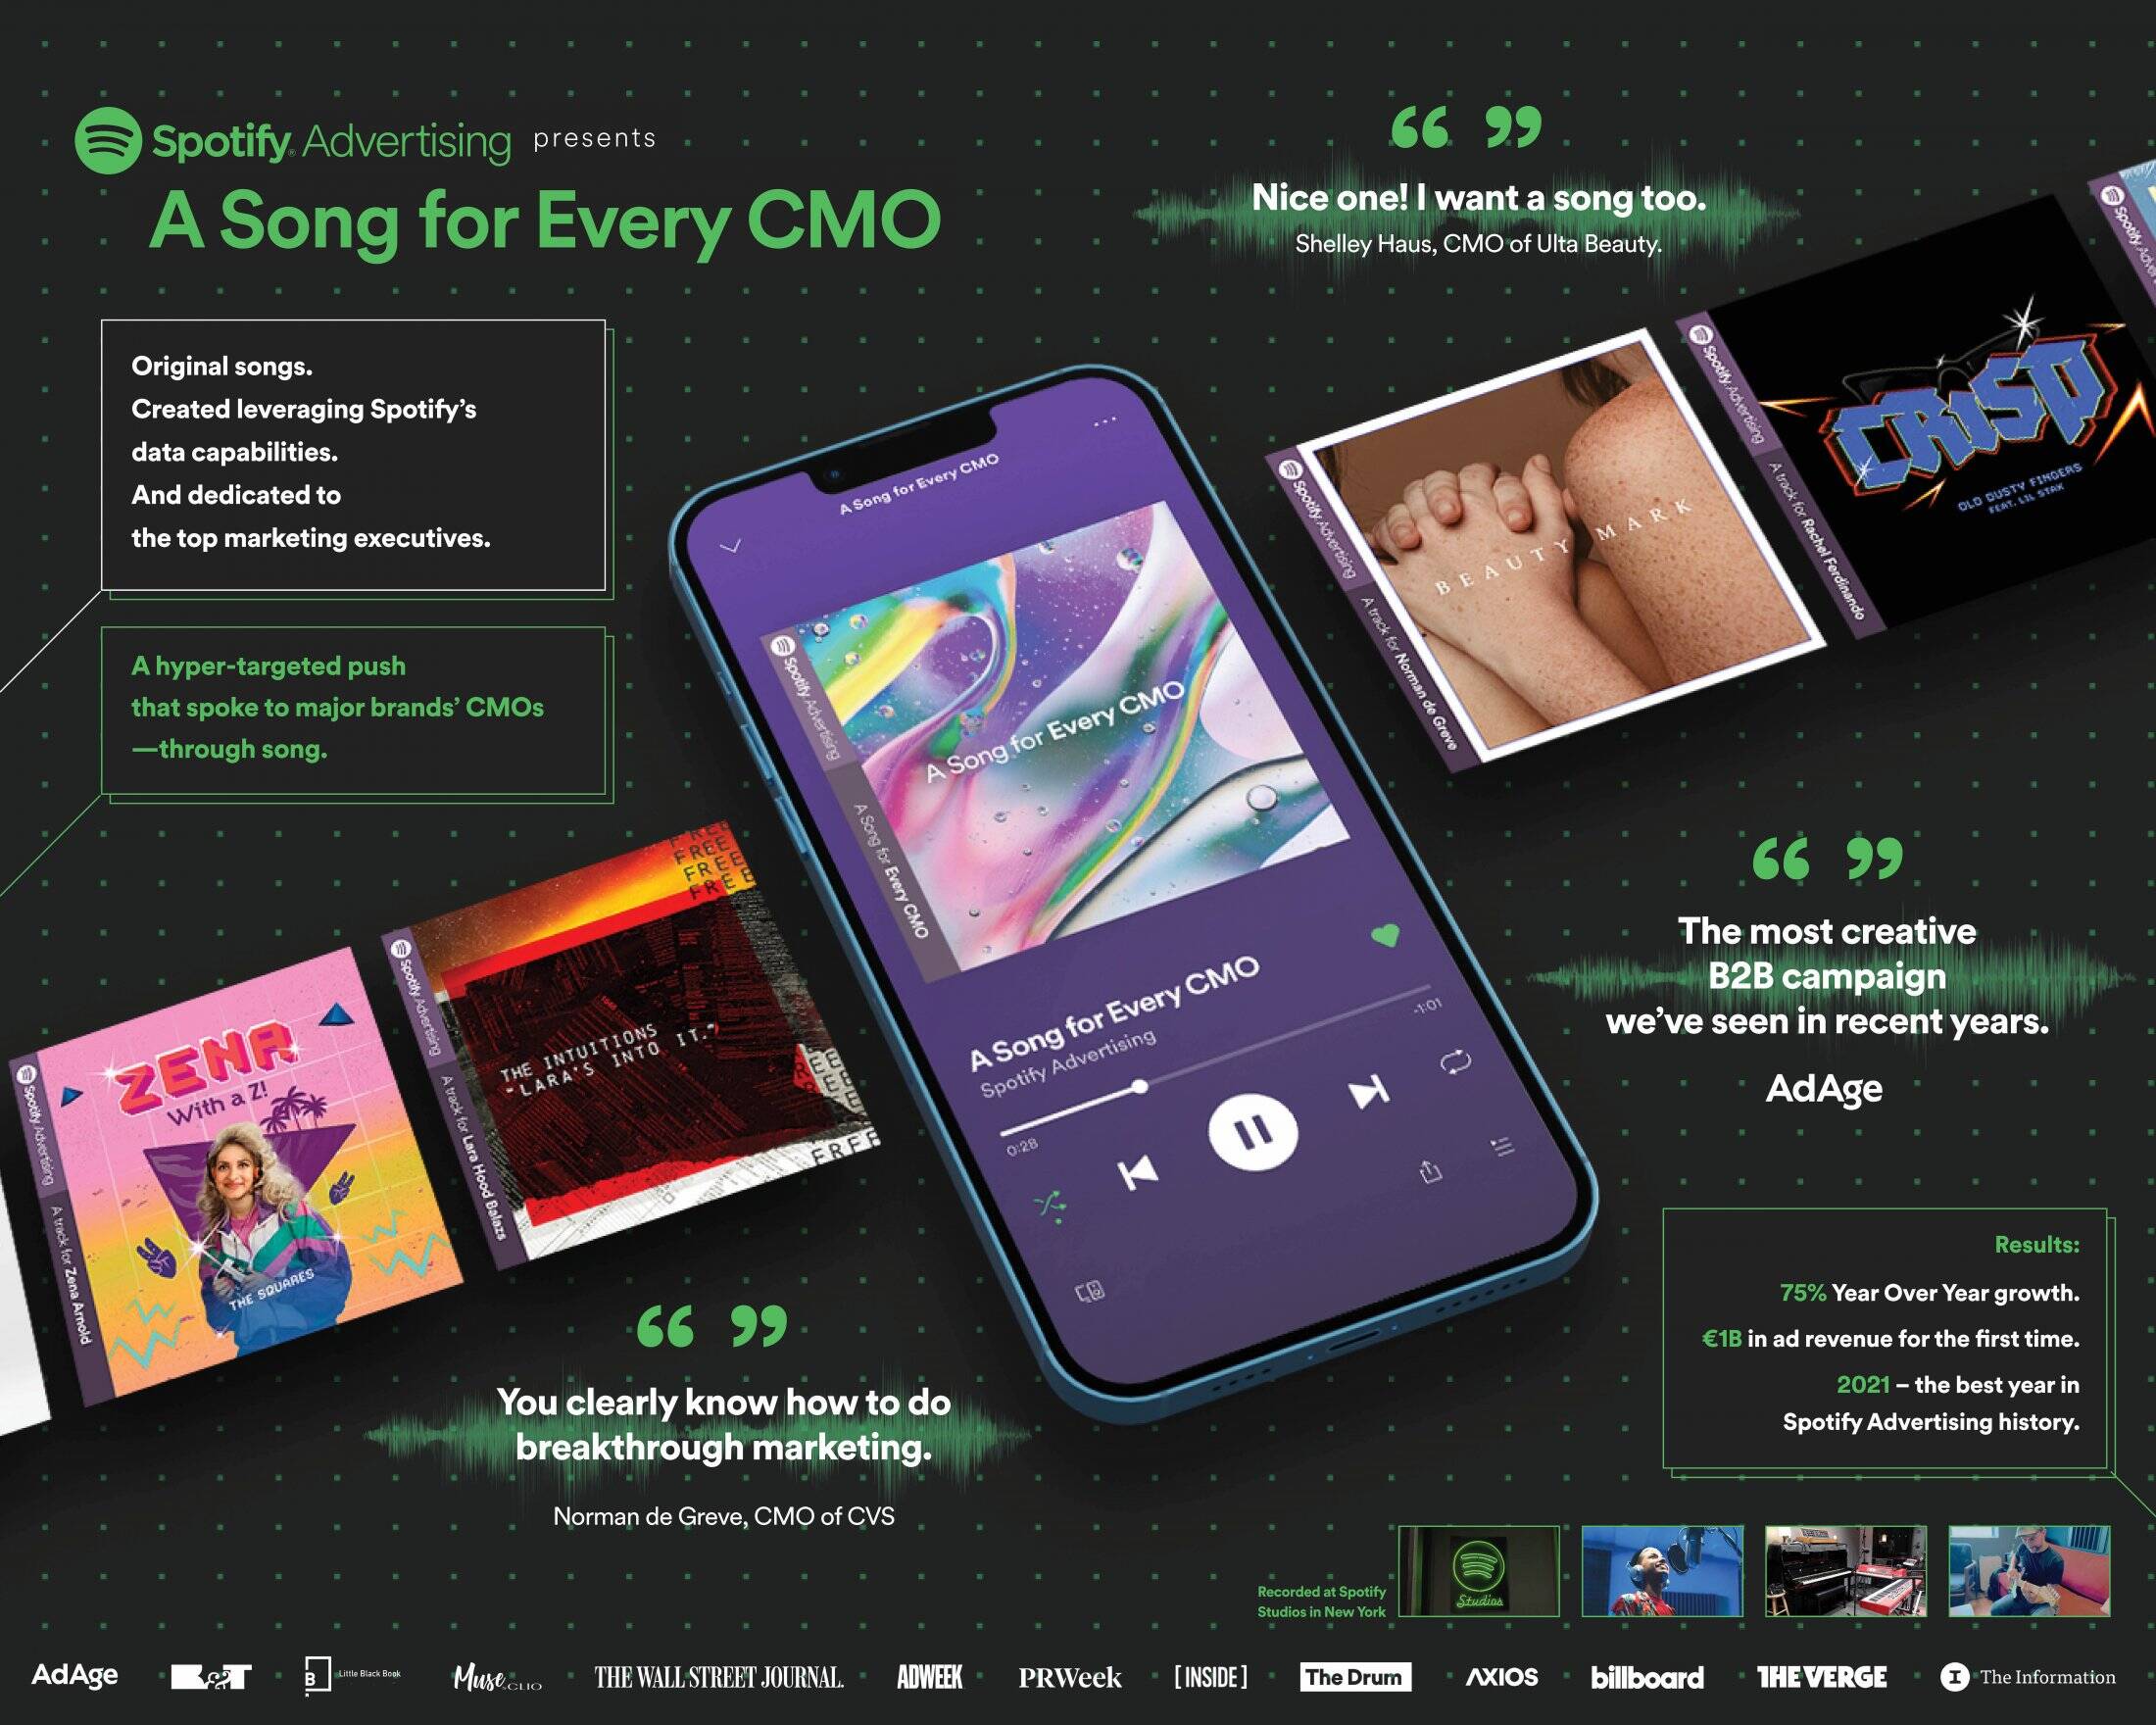 Spotify Advertising, A Song for Every CMO